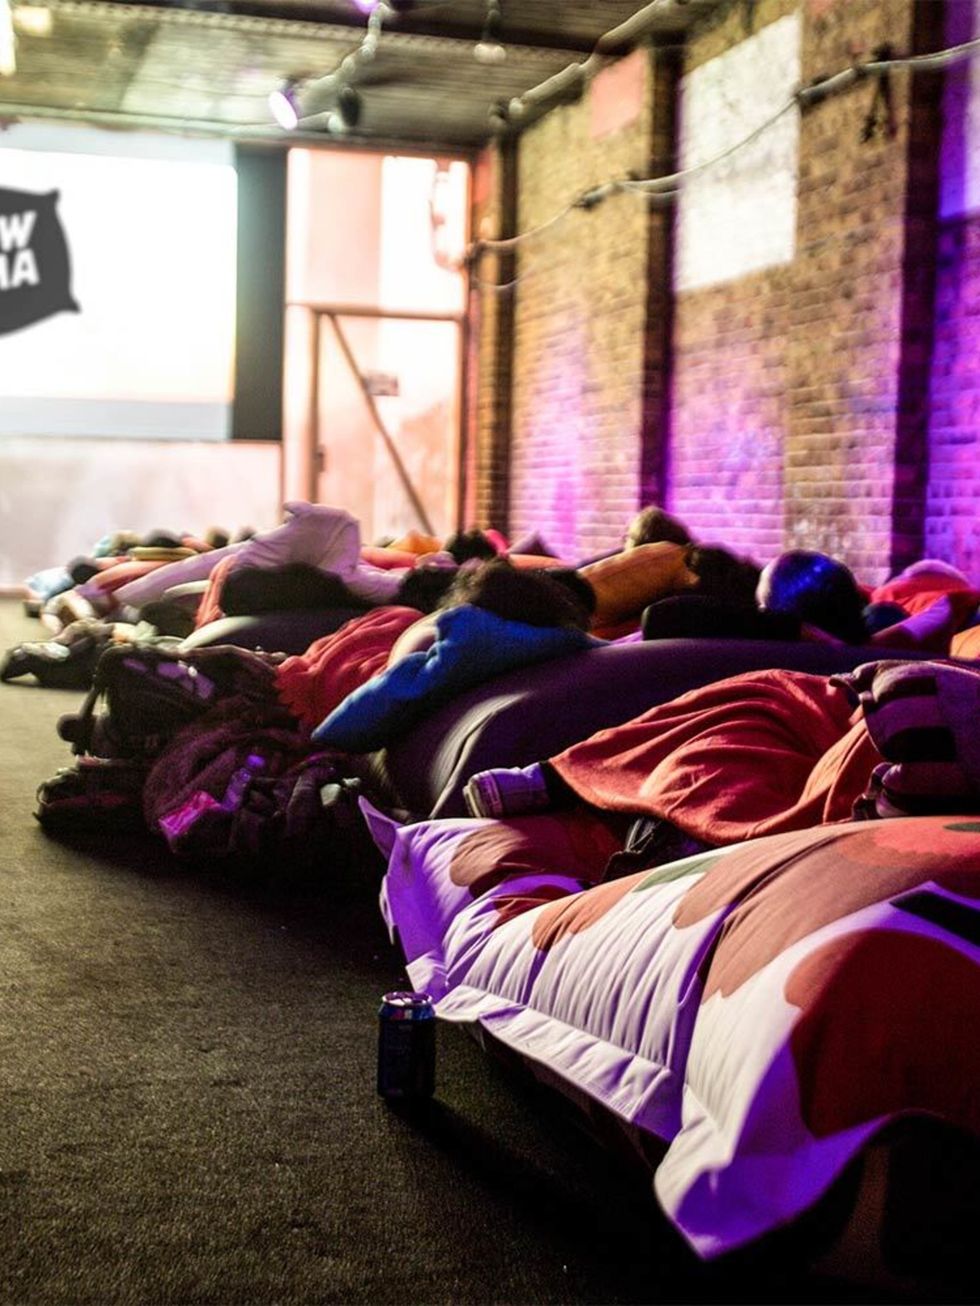 <p>FILM: Pillow Cinema, Shoreditch</p>

<p>Now, we like a trip to the multiplex as much as the next person. But dont you ever find yourself thinking: Whats with all this sitting upright? EFFORT. Well, good news, fellow lounging fans: the Pillow Cinema